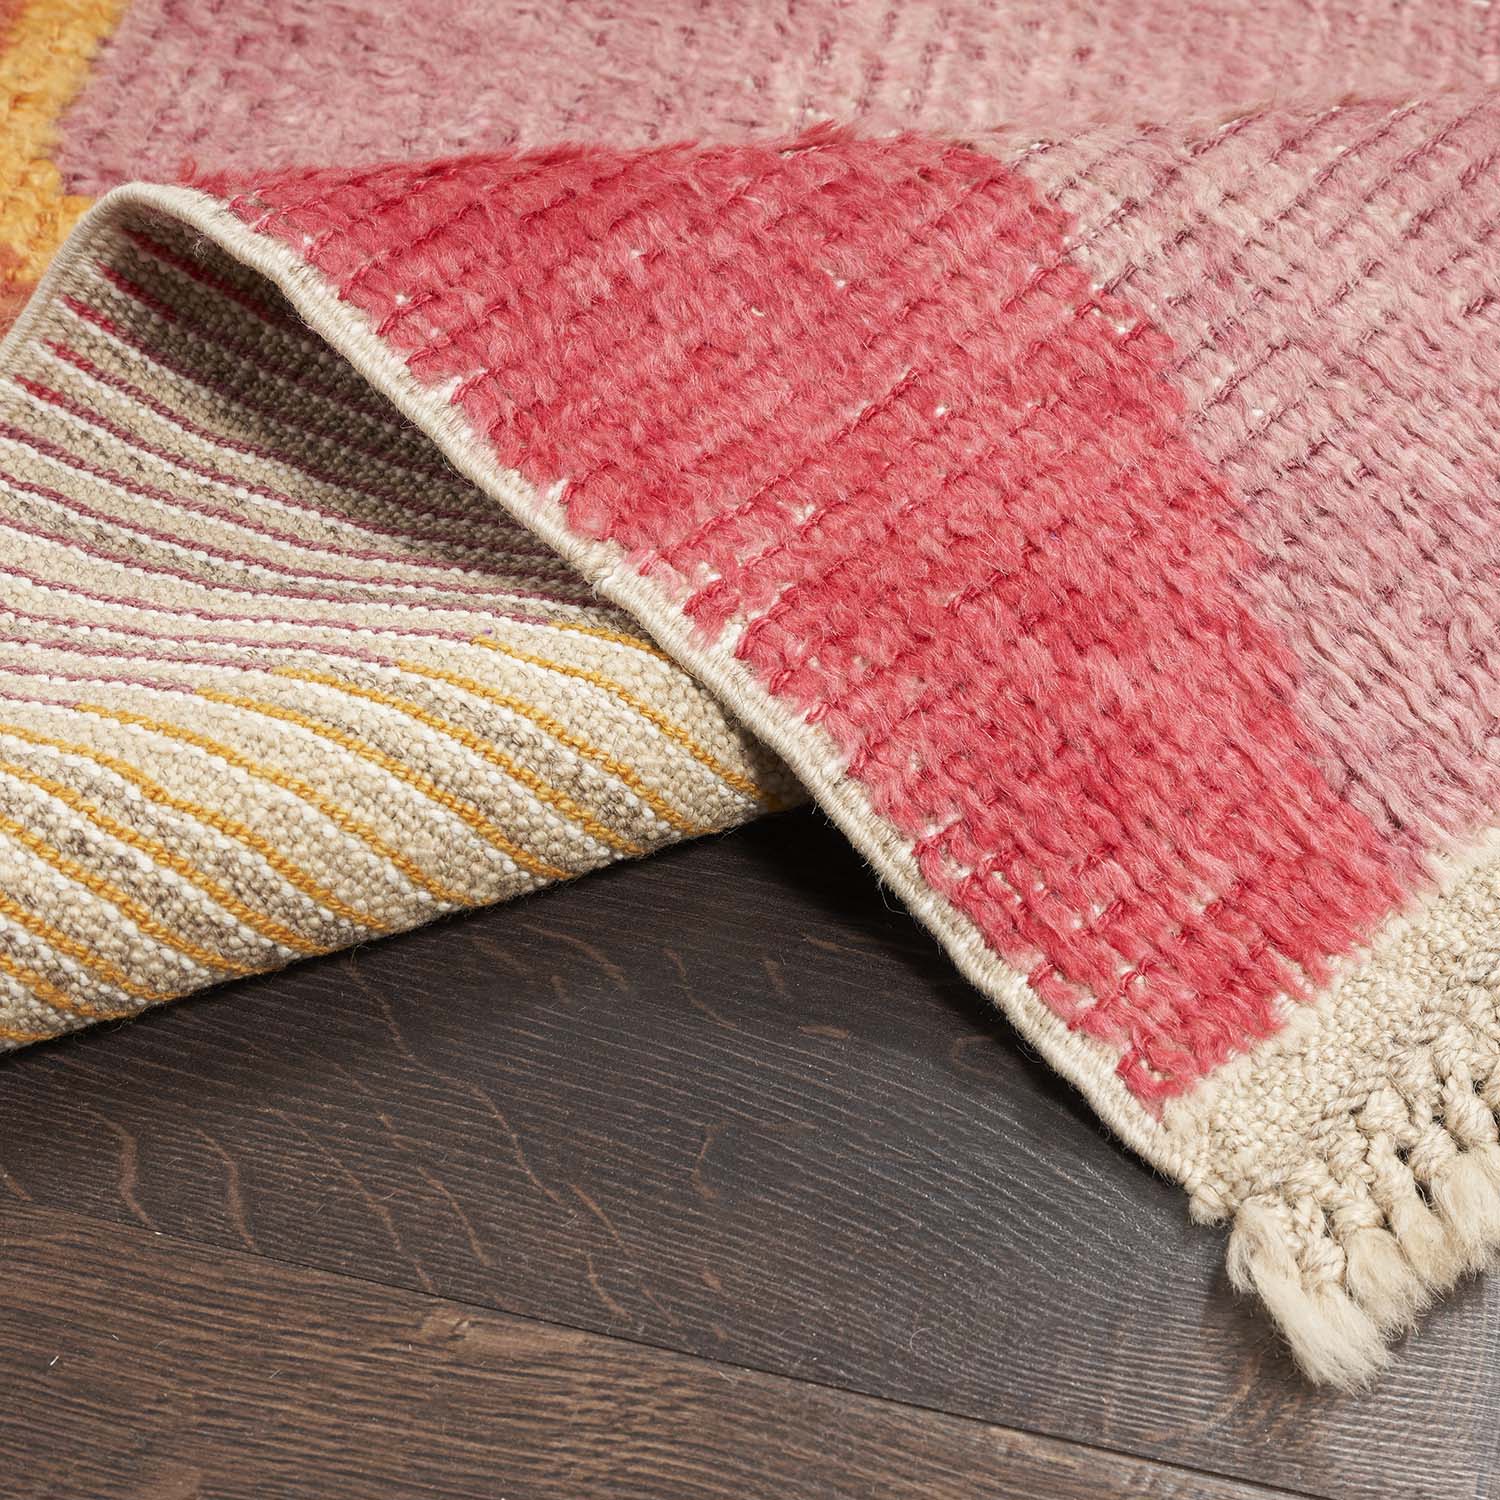 Close-up of a handwoven rug with warm-toned stripes on wood flooring